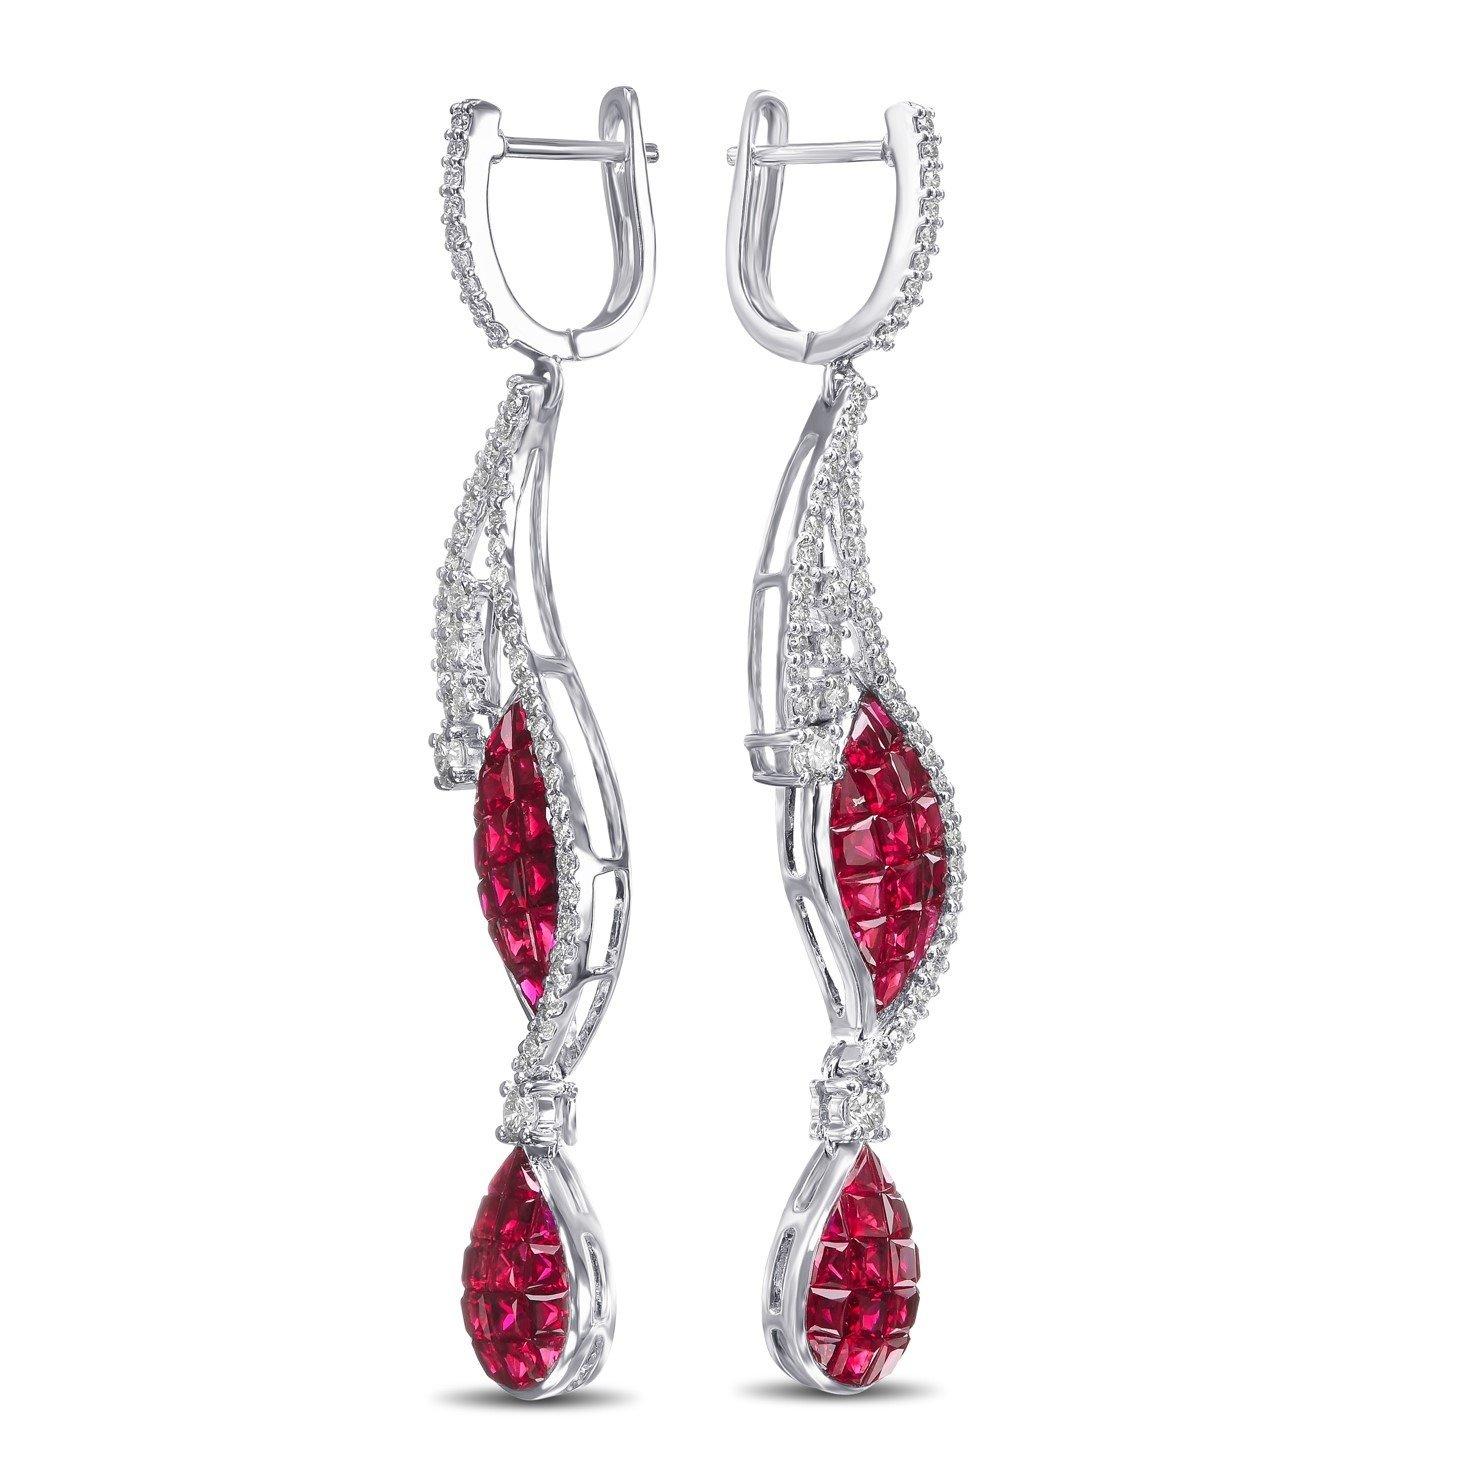 Mixed Cut NO RESERVE!  -  5.12cttw Ruby & 0.84Ct Diamonds - 18 kt. White Gold Earrings For Sale